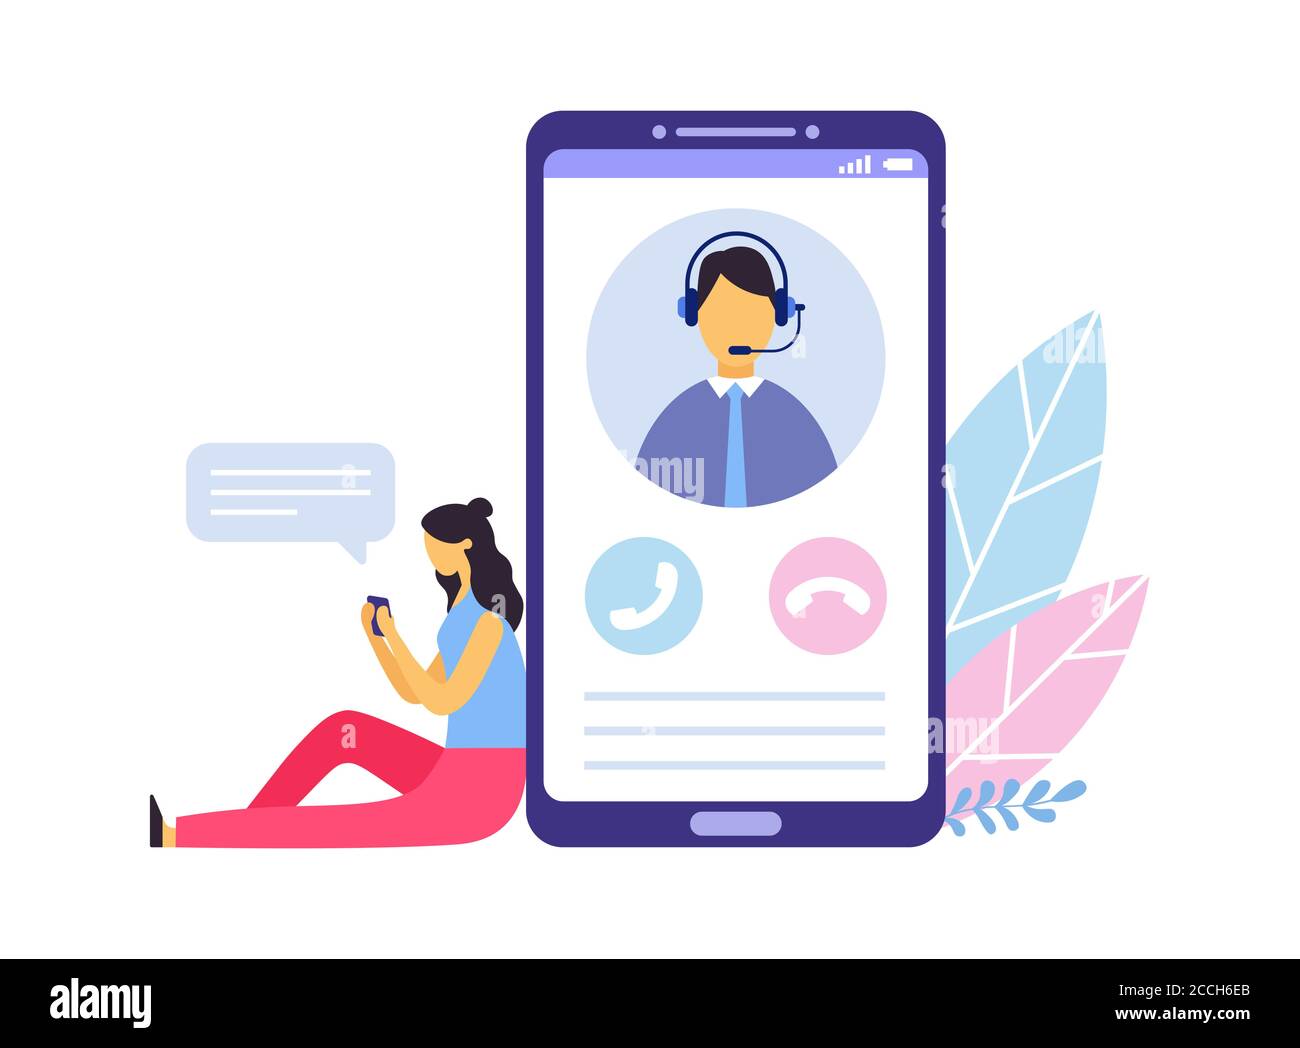 Customer support. Person advisor and helpful advice services. Woman sitting next to big smartphone and chat Stock Vector